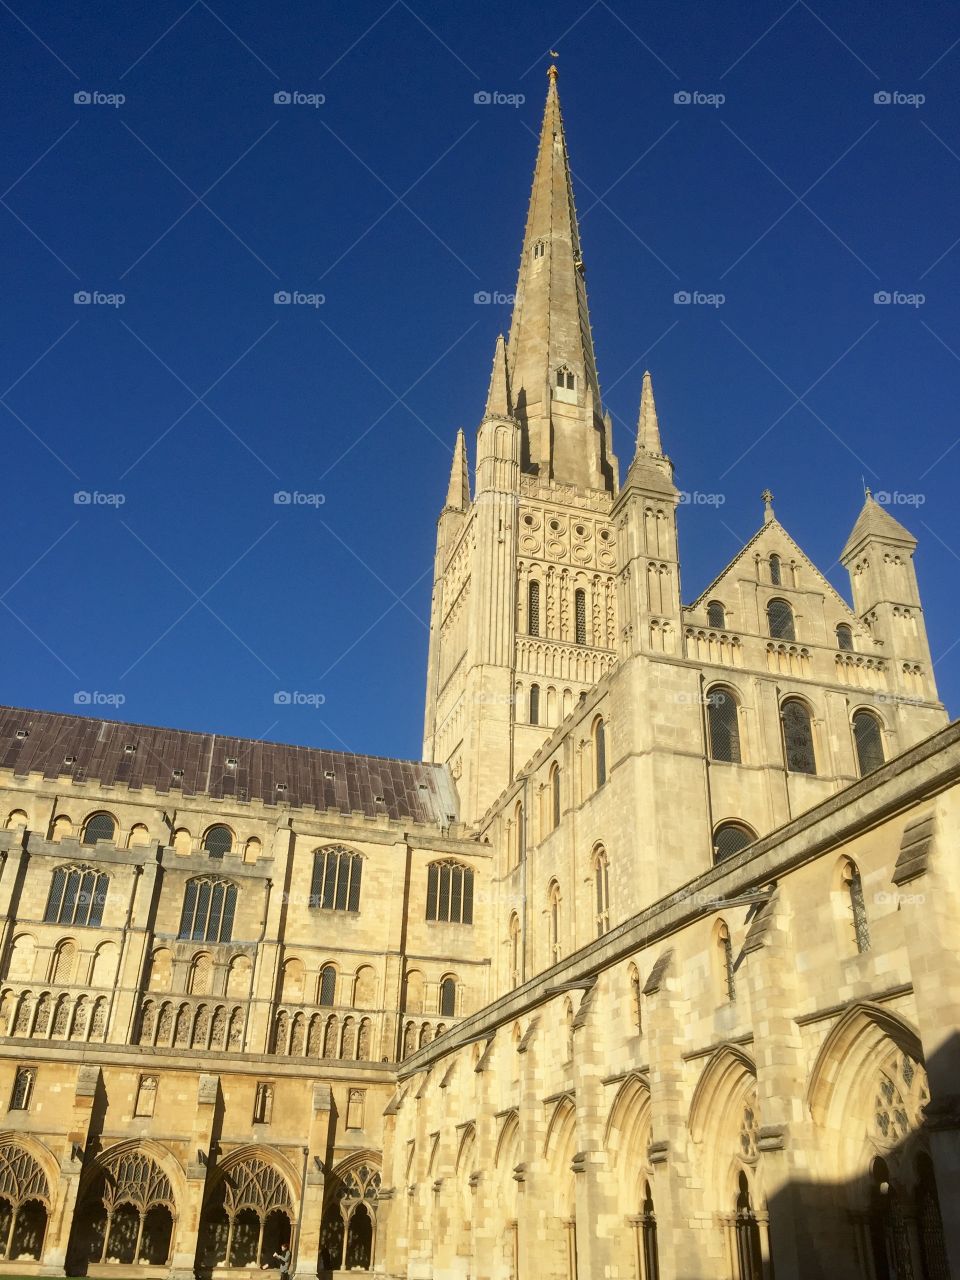 Norwich cathedral in England, with blue sky